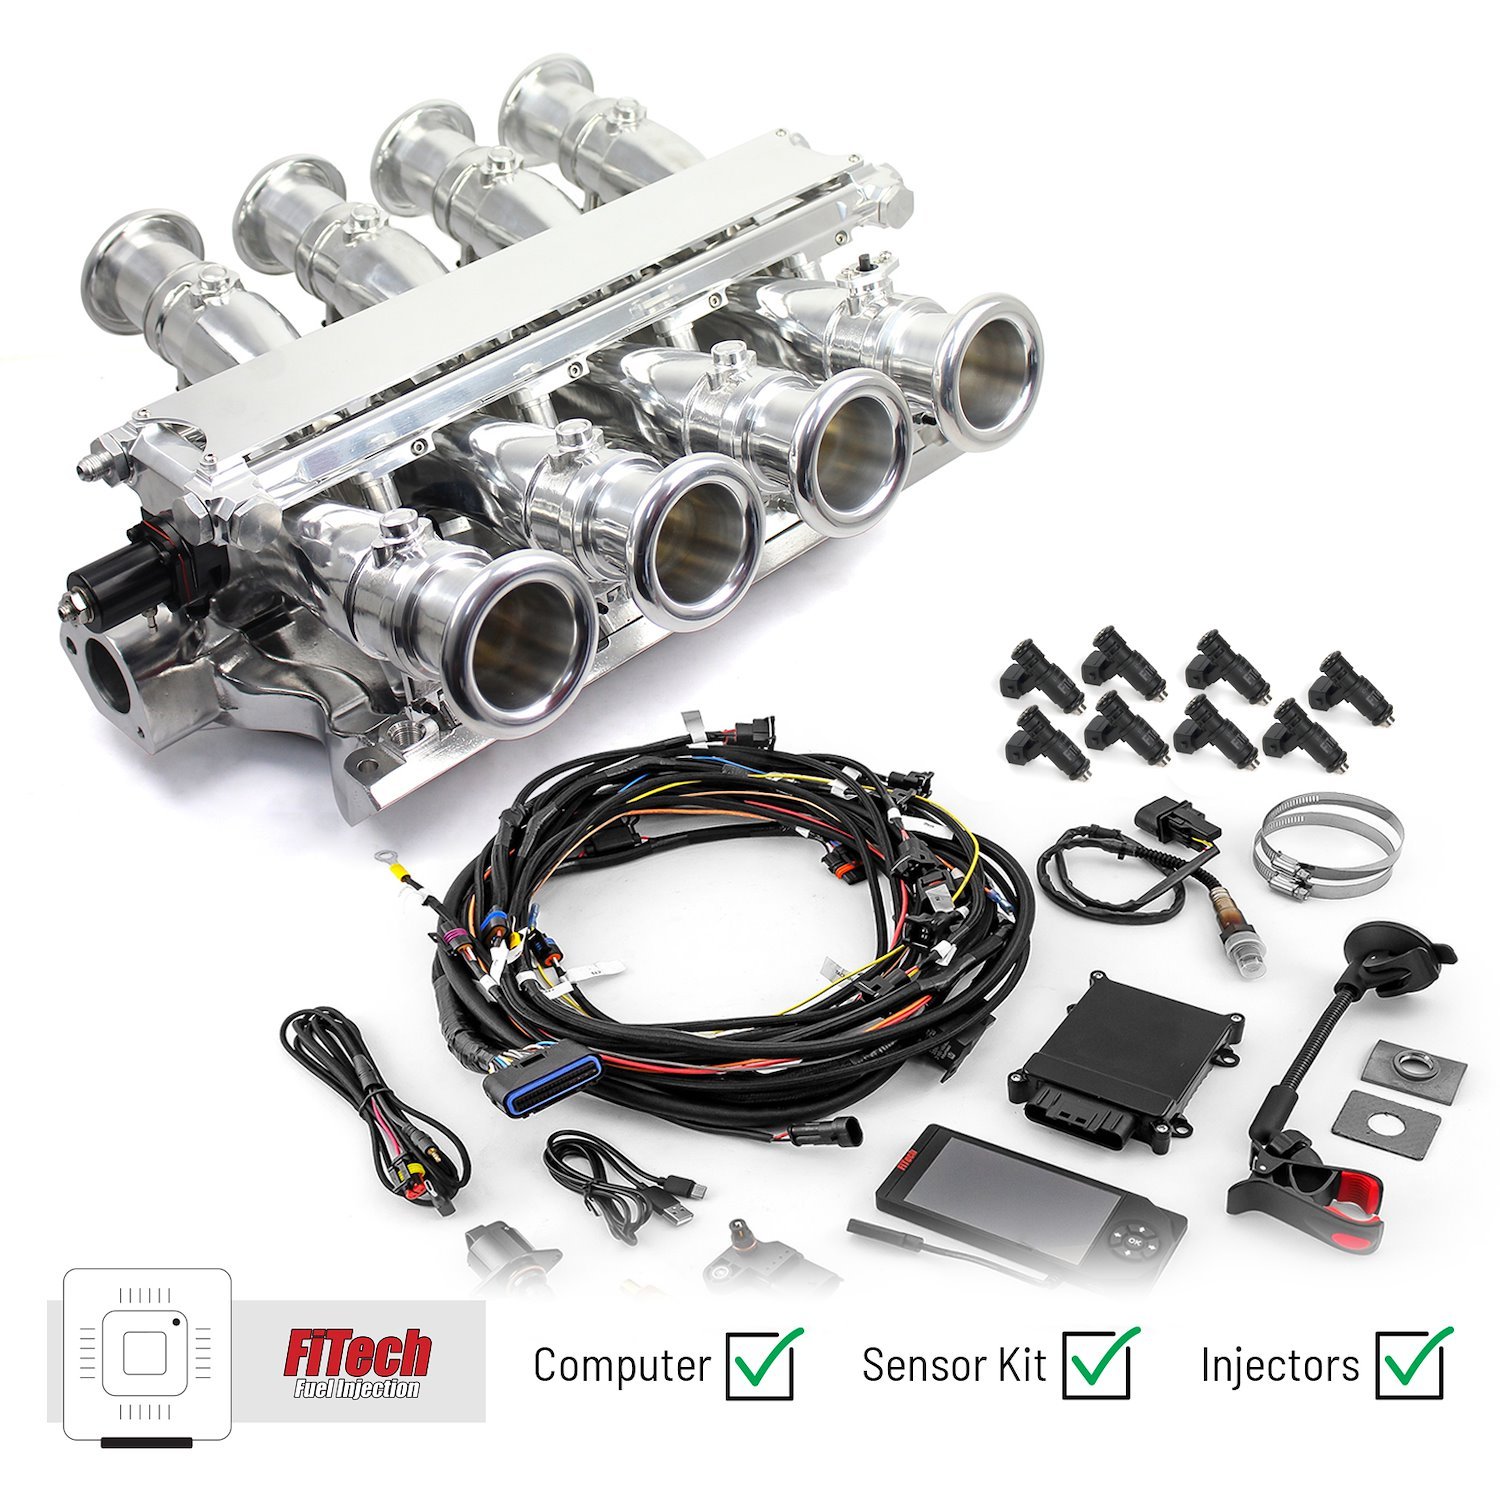 1-135-006-02 Ford 351W Windsor Sidedraft & FiTech Ultra EFI Fuel Injection System [Polished]